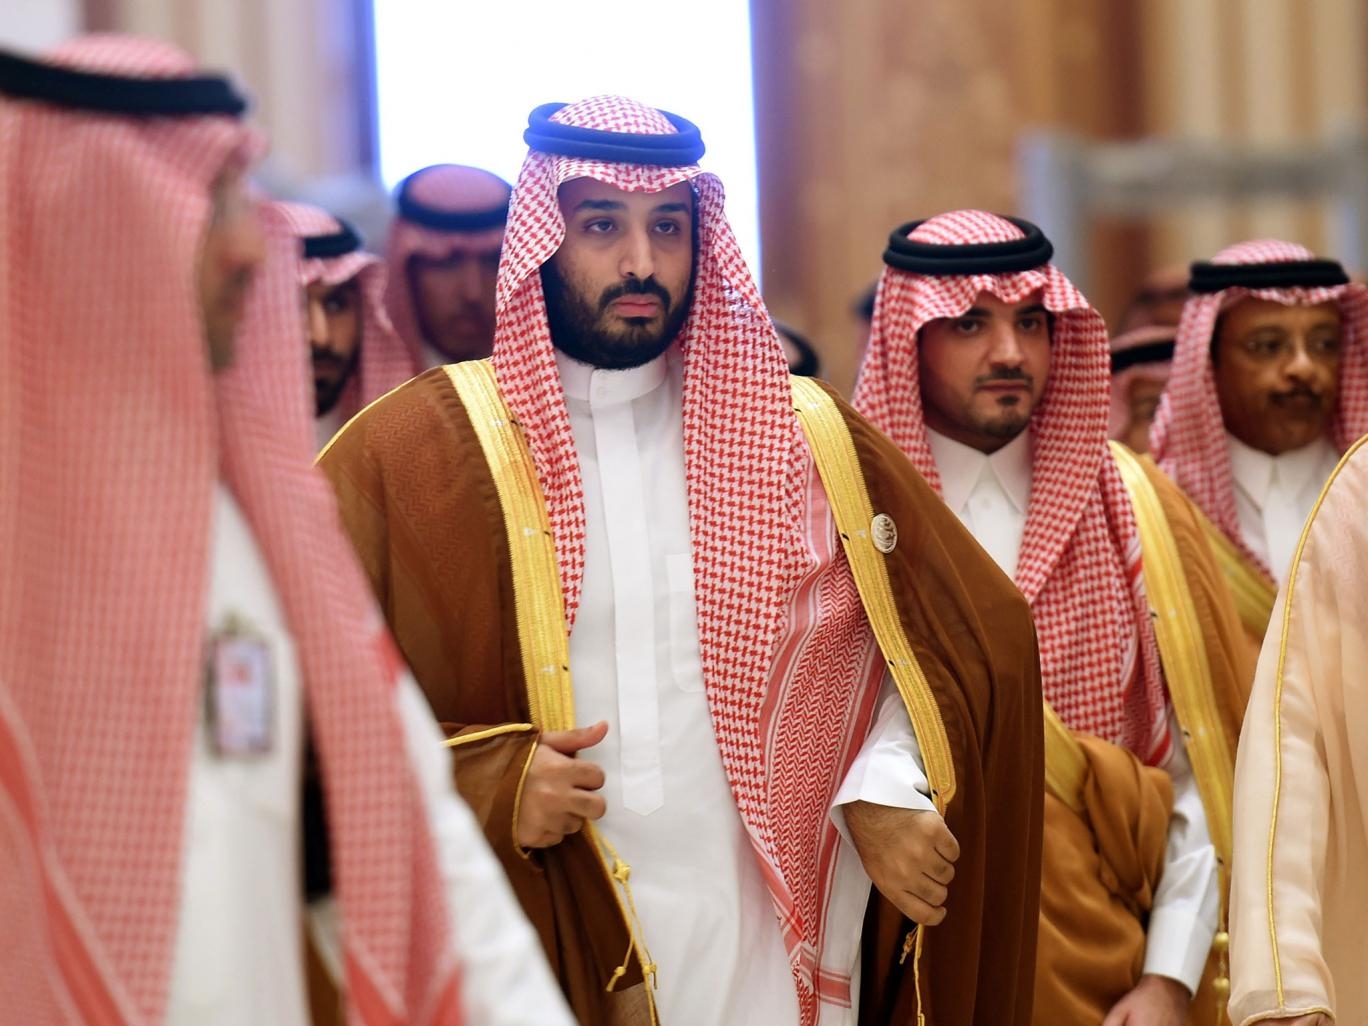 Saudi Arabia is playing an increasingly destabilising role in the Middle East, German intelligence warns